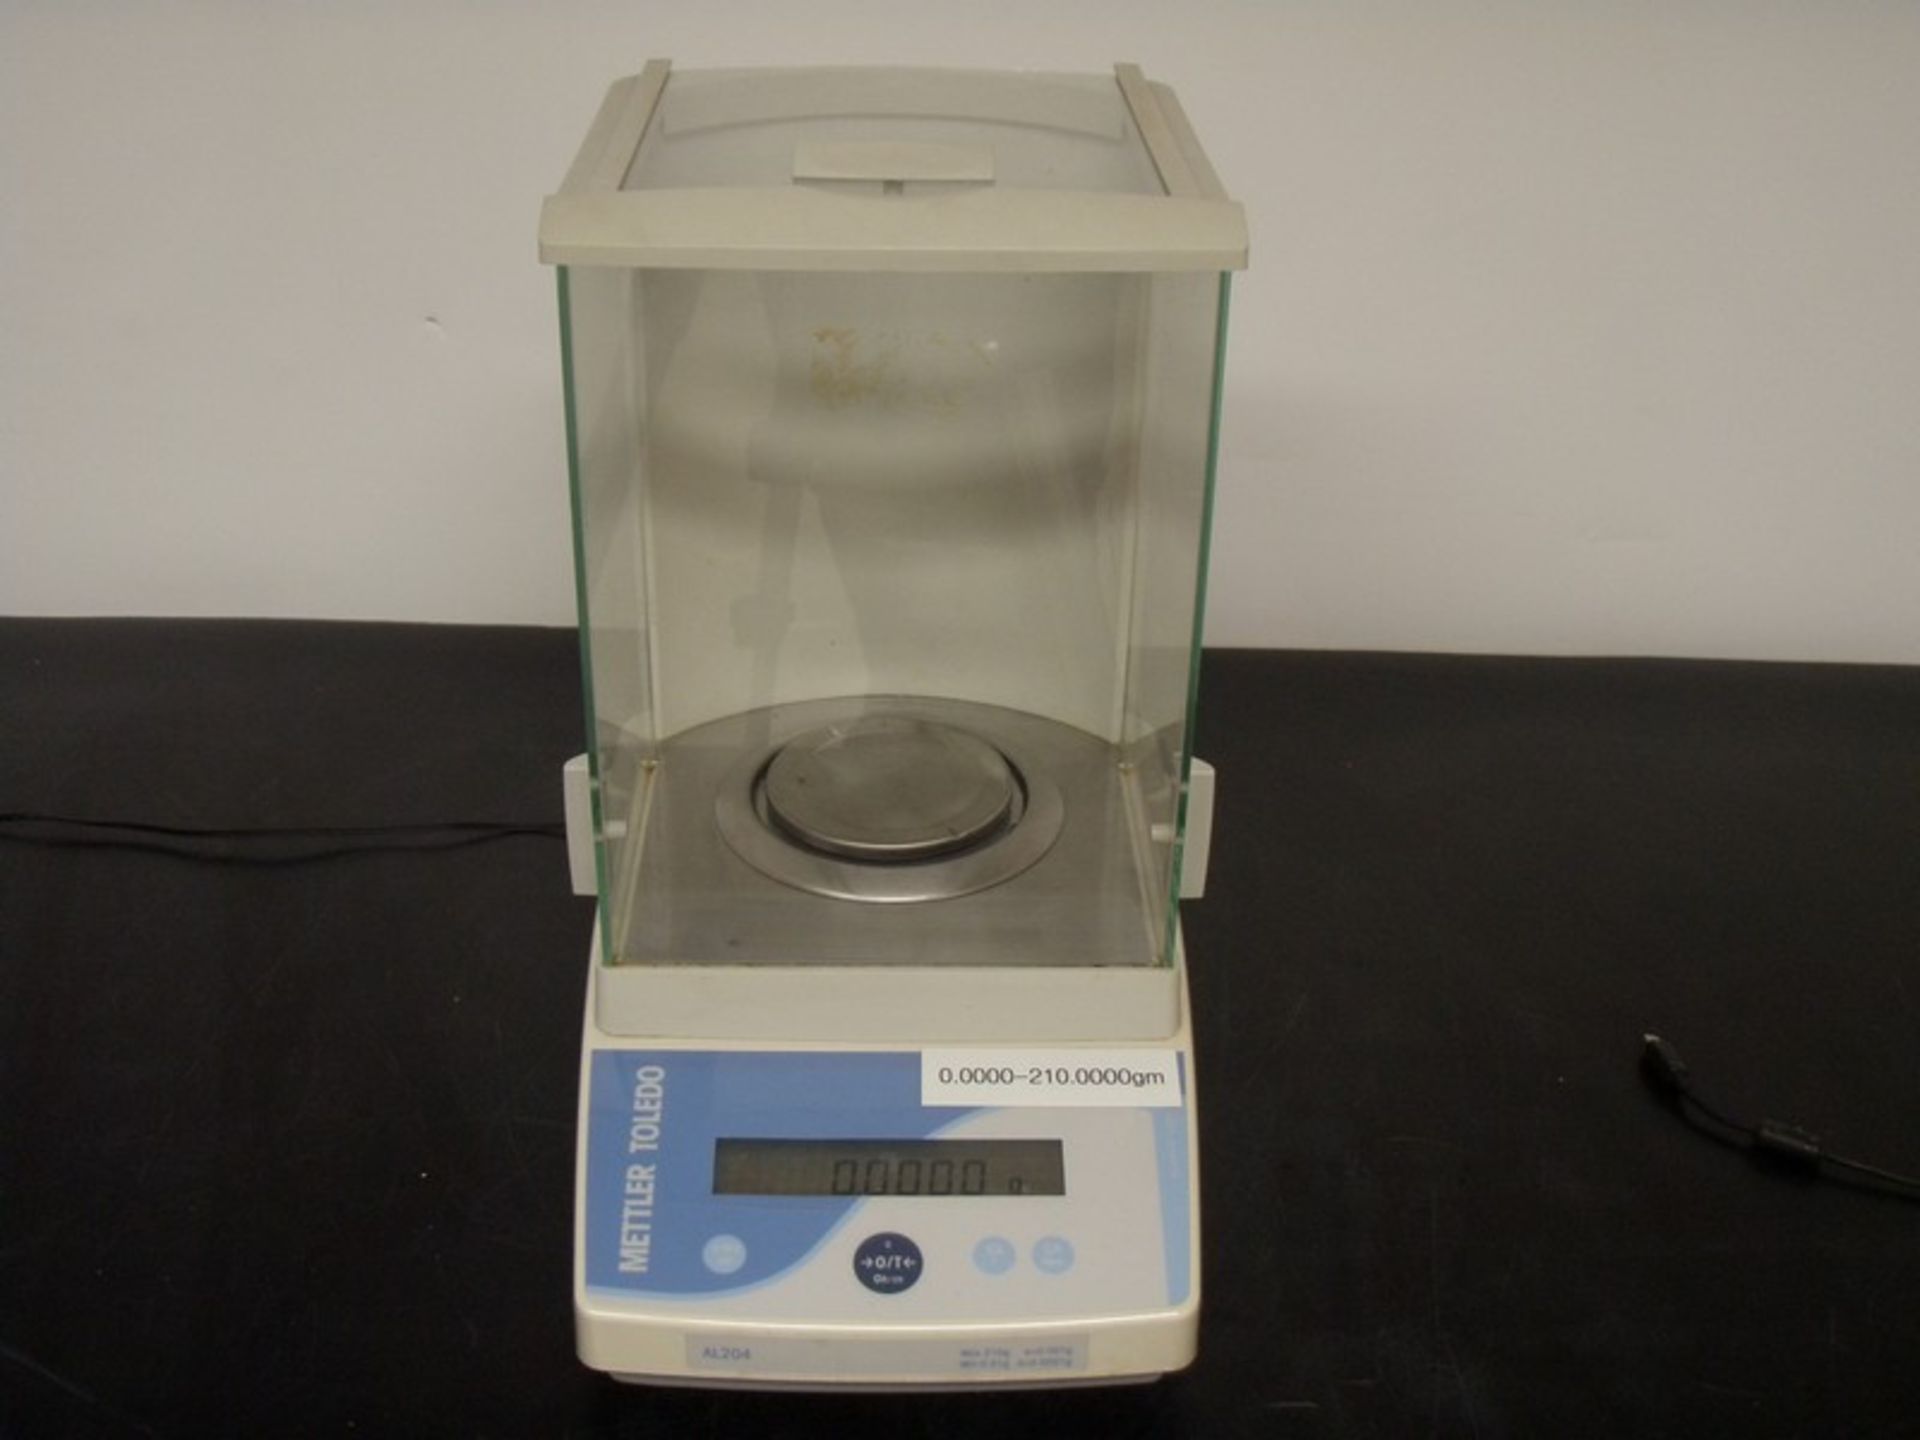 Mettler Toledo Analytical Balance, Model AL204, S/N 1231190071, Includes Power Cord (NOTE: Balance